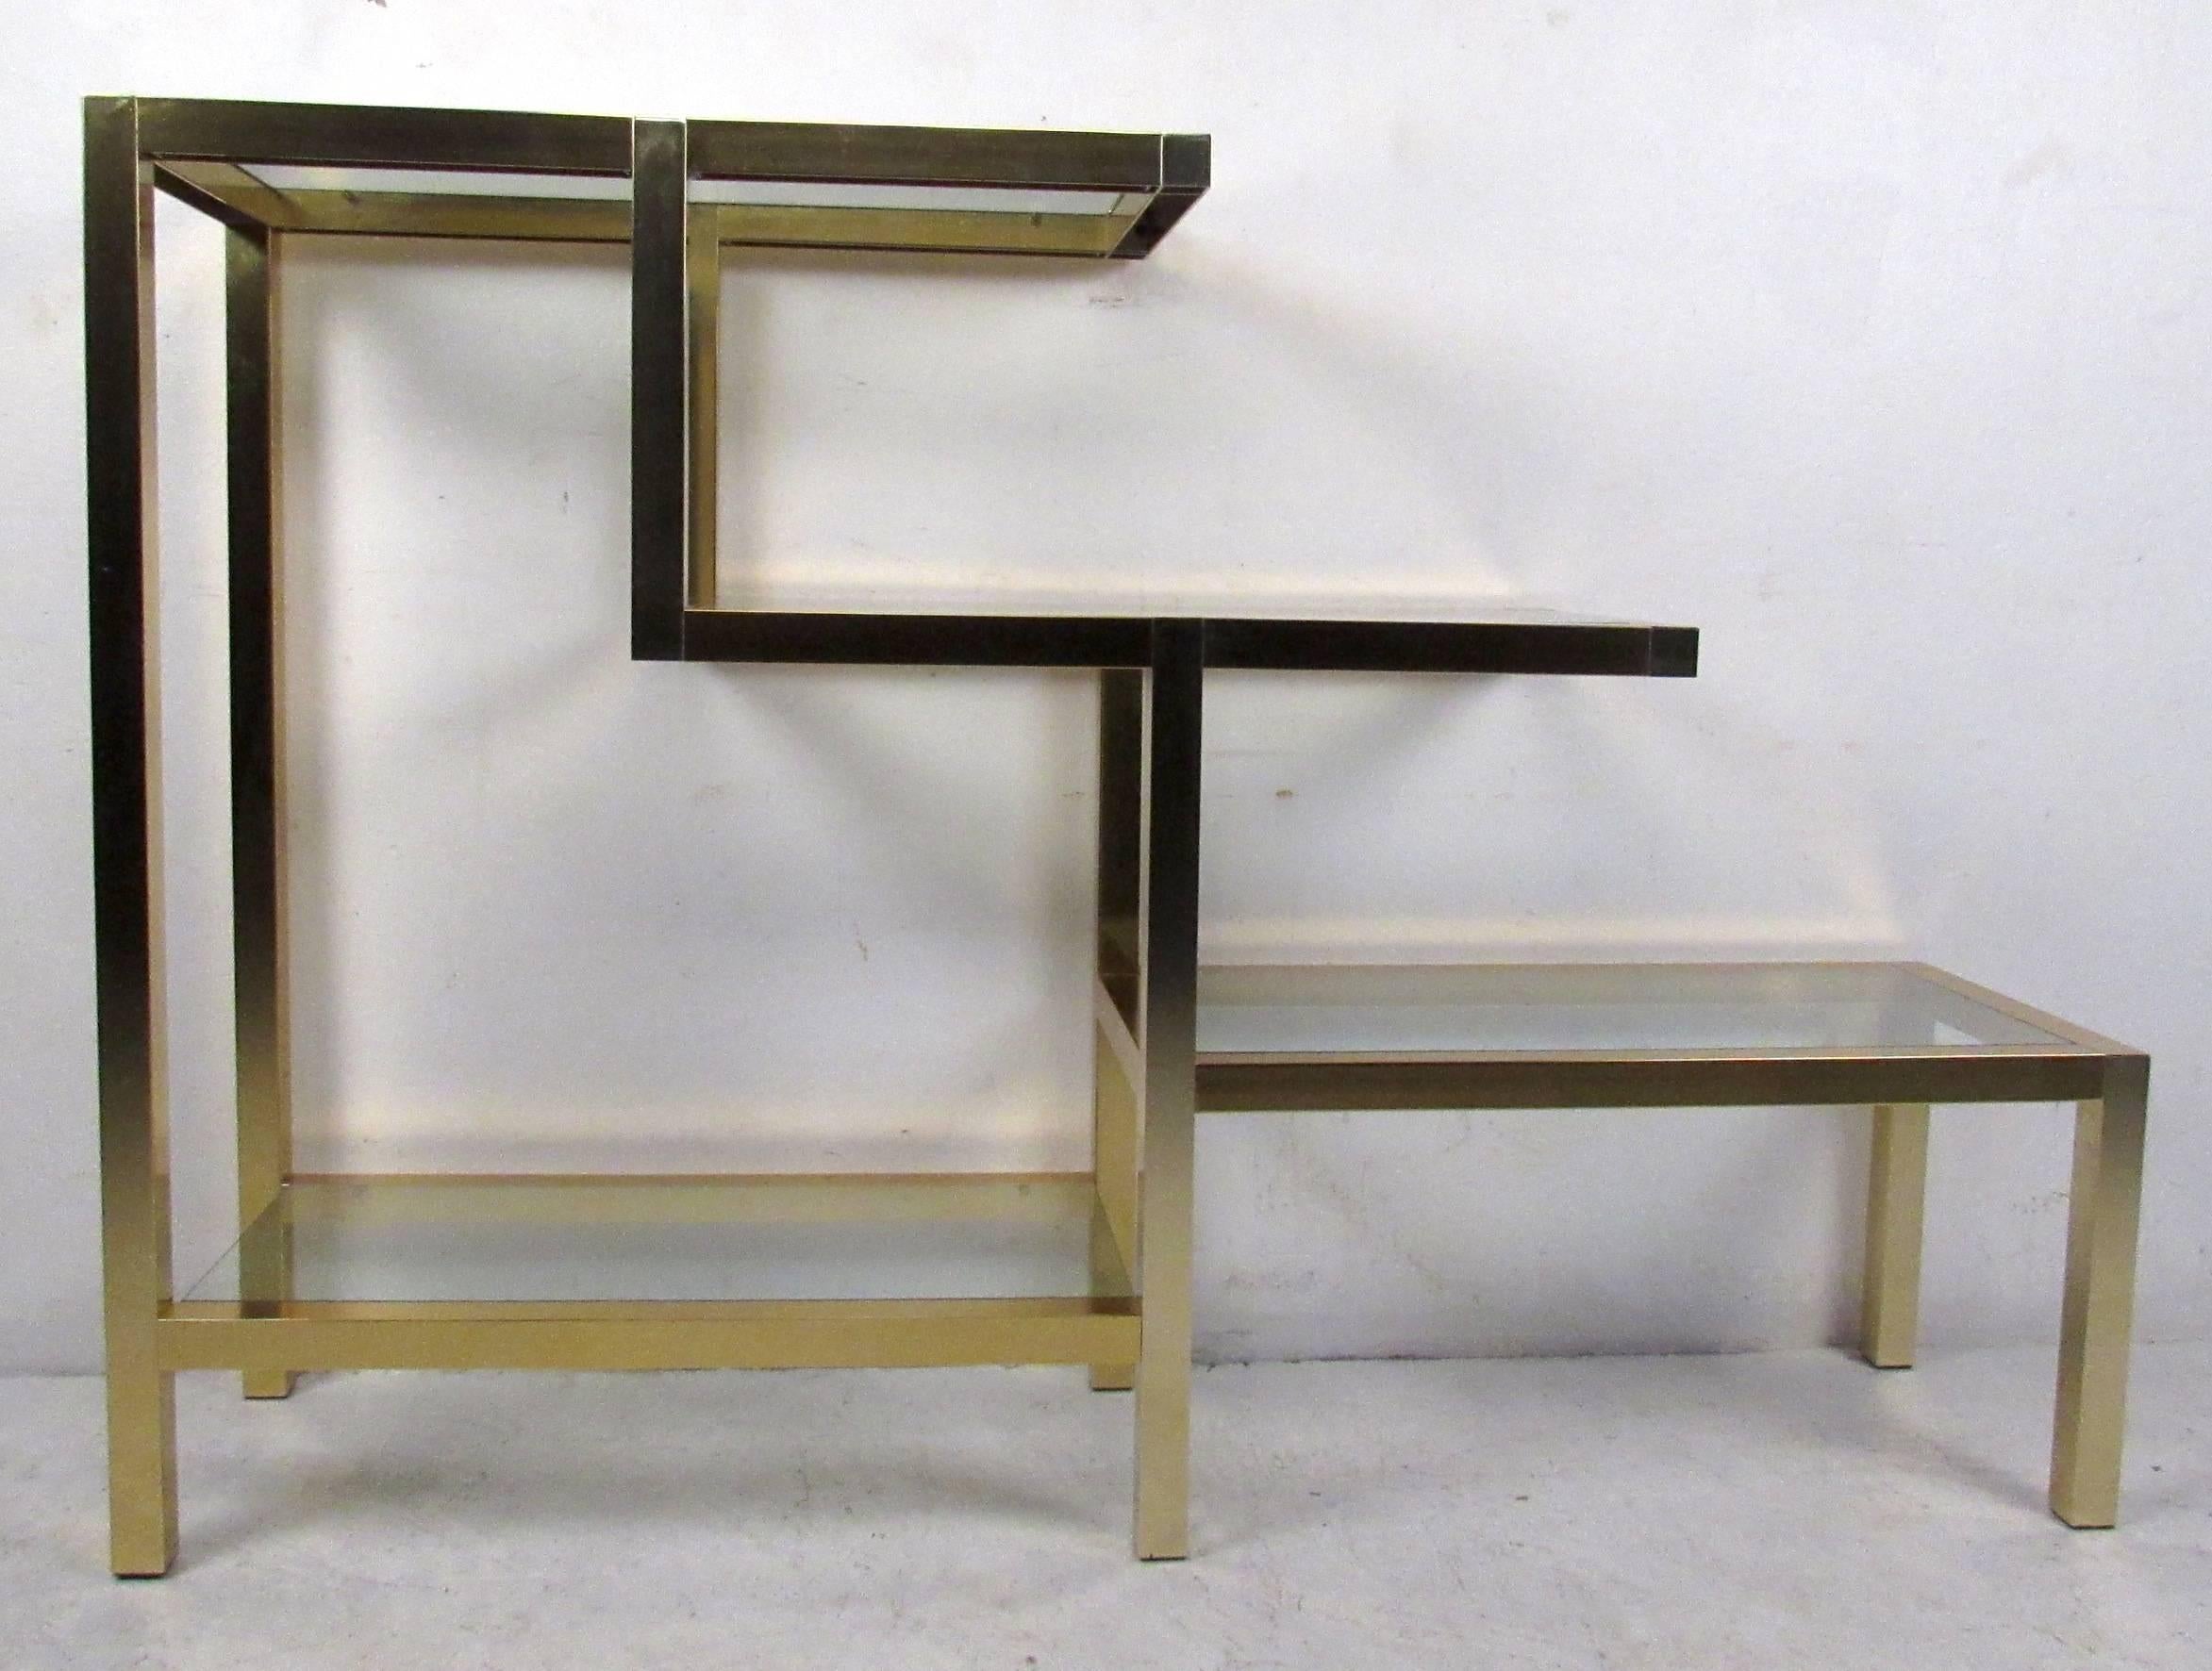 Vintage-modern Milo Baughman style bookcase featuring sculpted body with brass finish and four glass shelves. Stunning display shelf for home, office, or business use.

Please confirm item location NY or NJ with dealer.